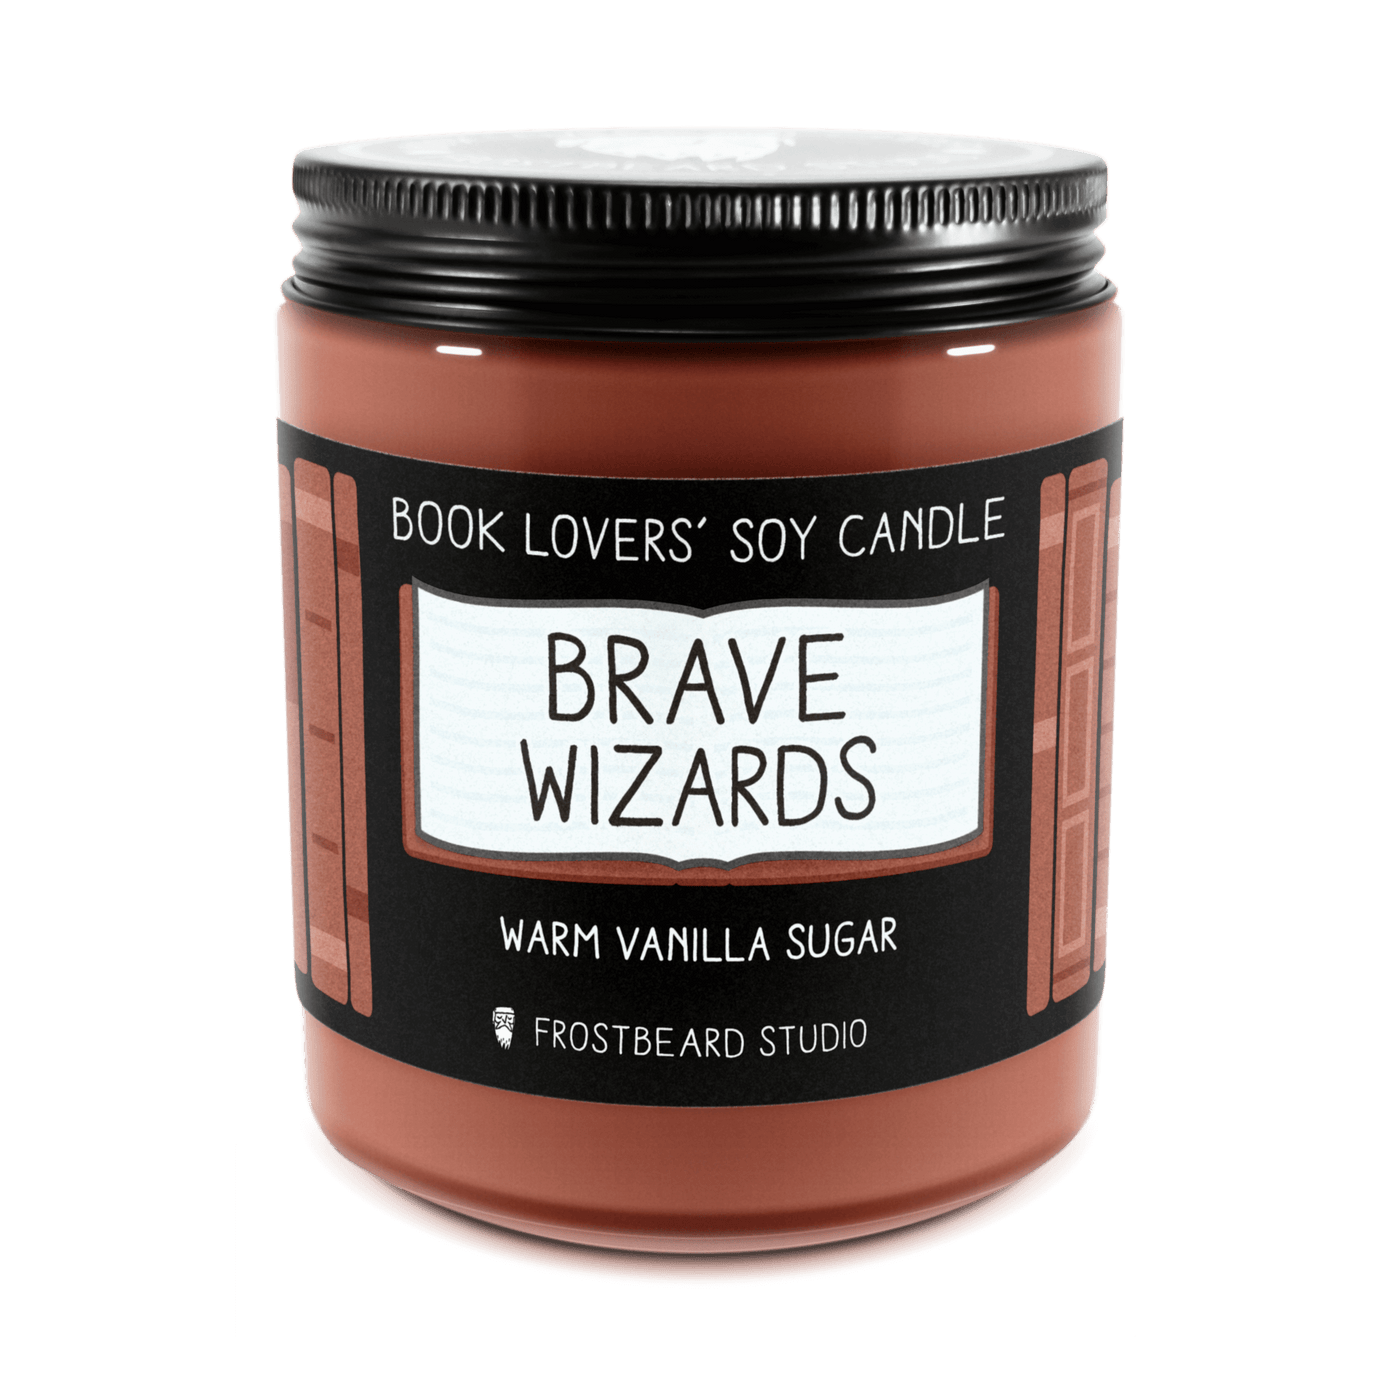 Brave Wizards - 8 oz Jar - Book Lovers' Soy Candle - Frostbeard Studio